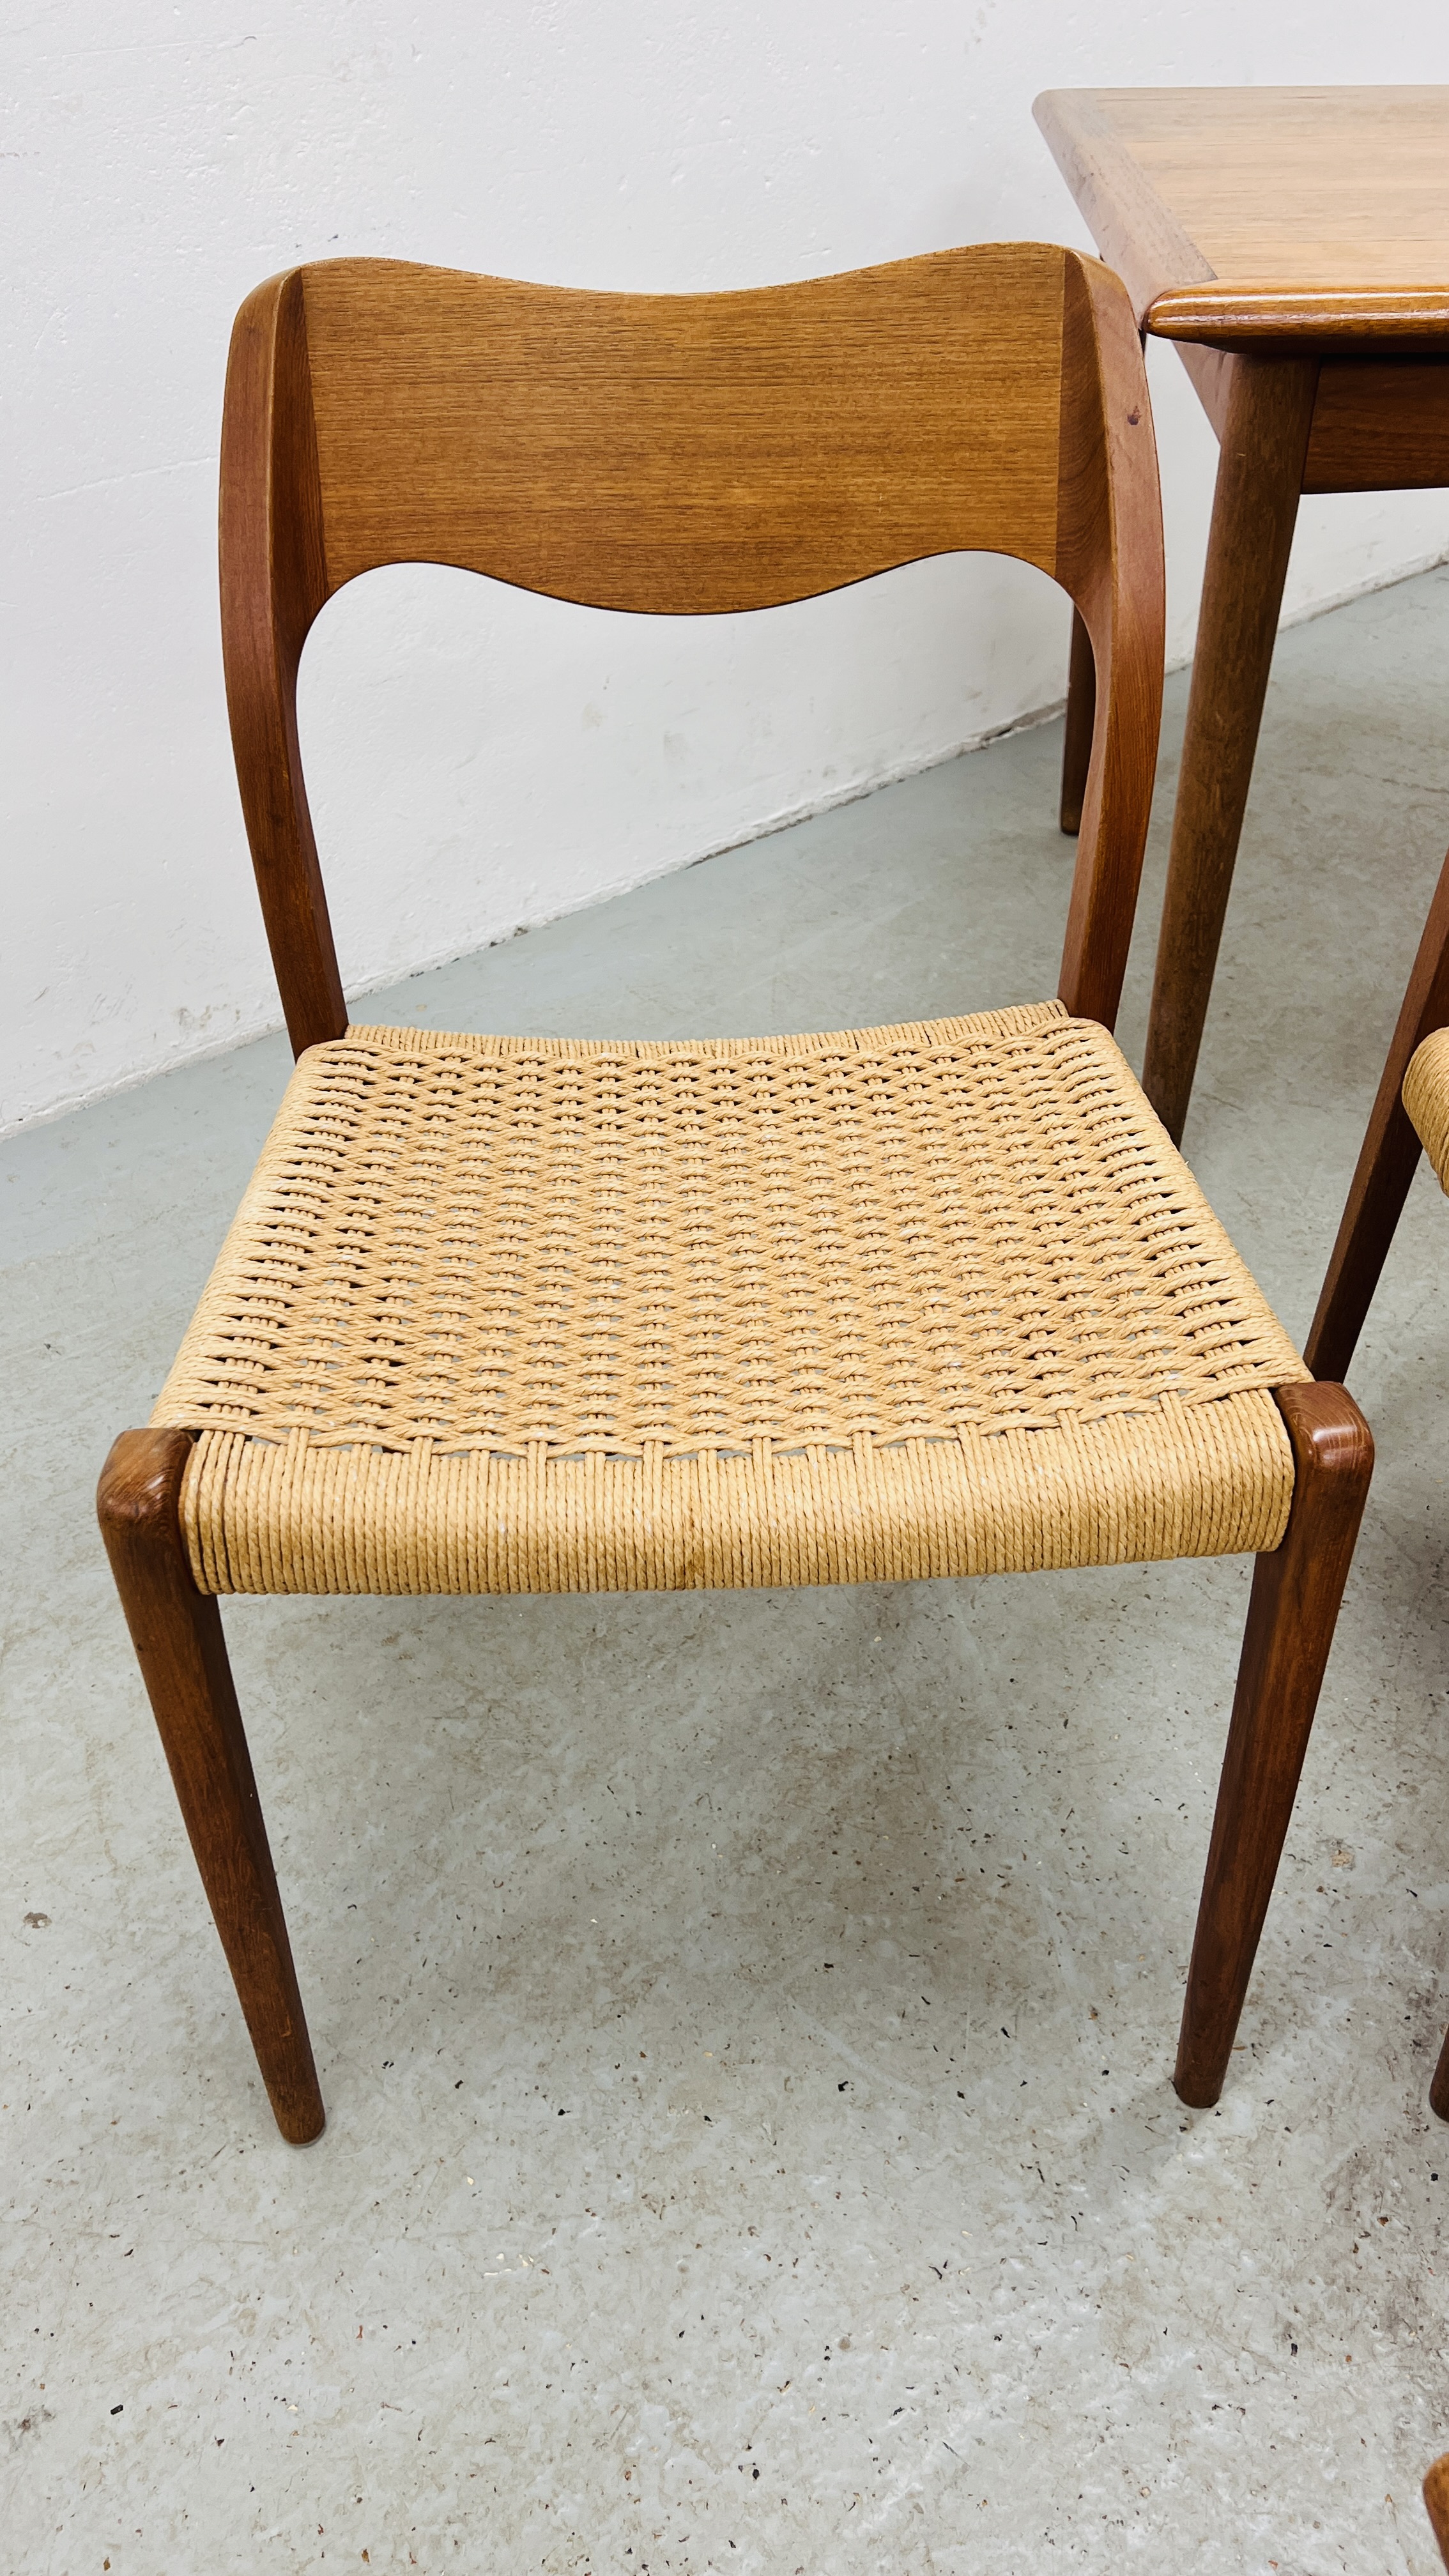 SET OF EIGHT J MOLLER DANISH TEAK DINING CHAIRS WITH WOVEN SISAL SEATS ALONG WITH A DRAWER LEAF - Image 17 of 48